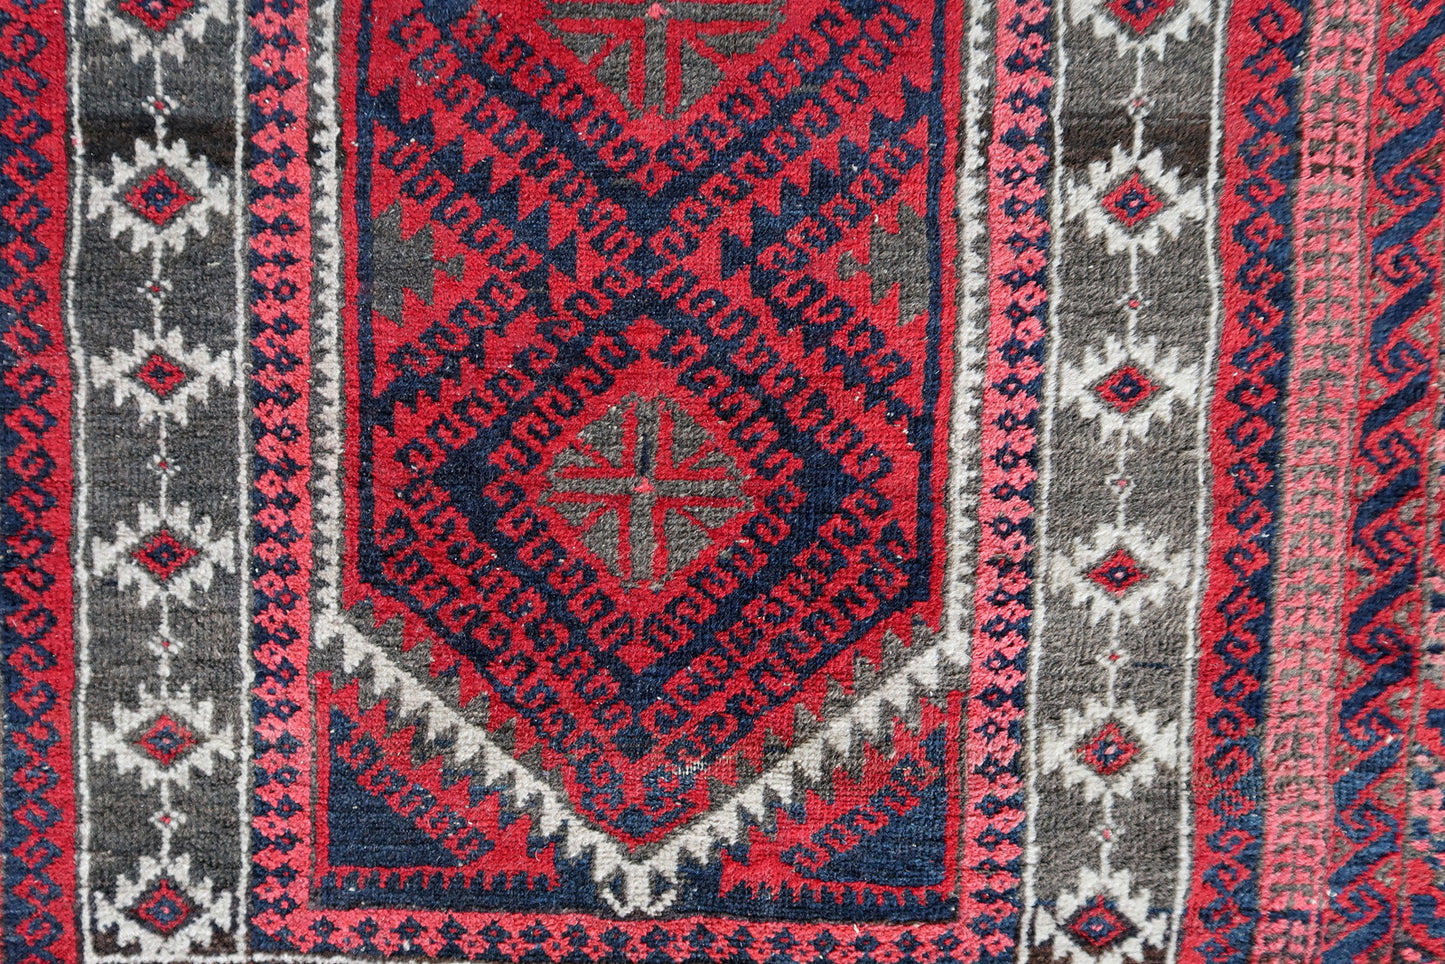 Handmade vintage Afghan Baluch rug in red and night blue colors. The rug is from the beginning of 20th century, it is in original good condition. This rug is prayer.